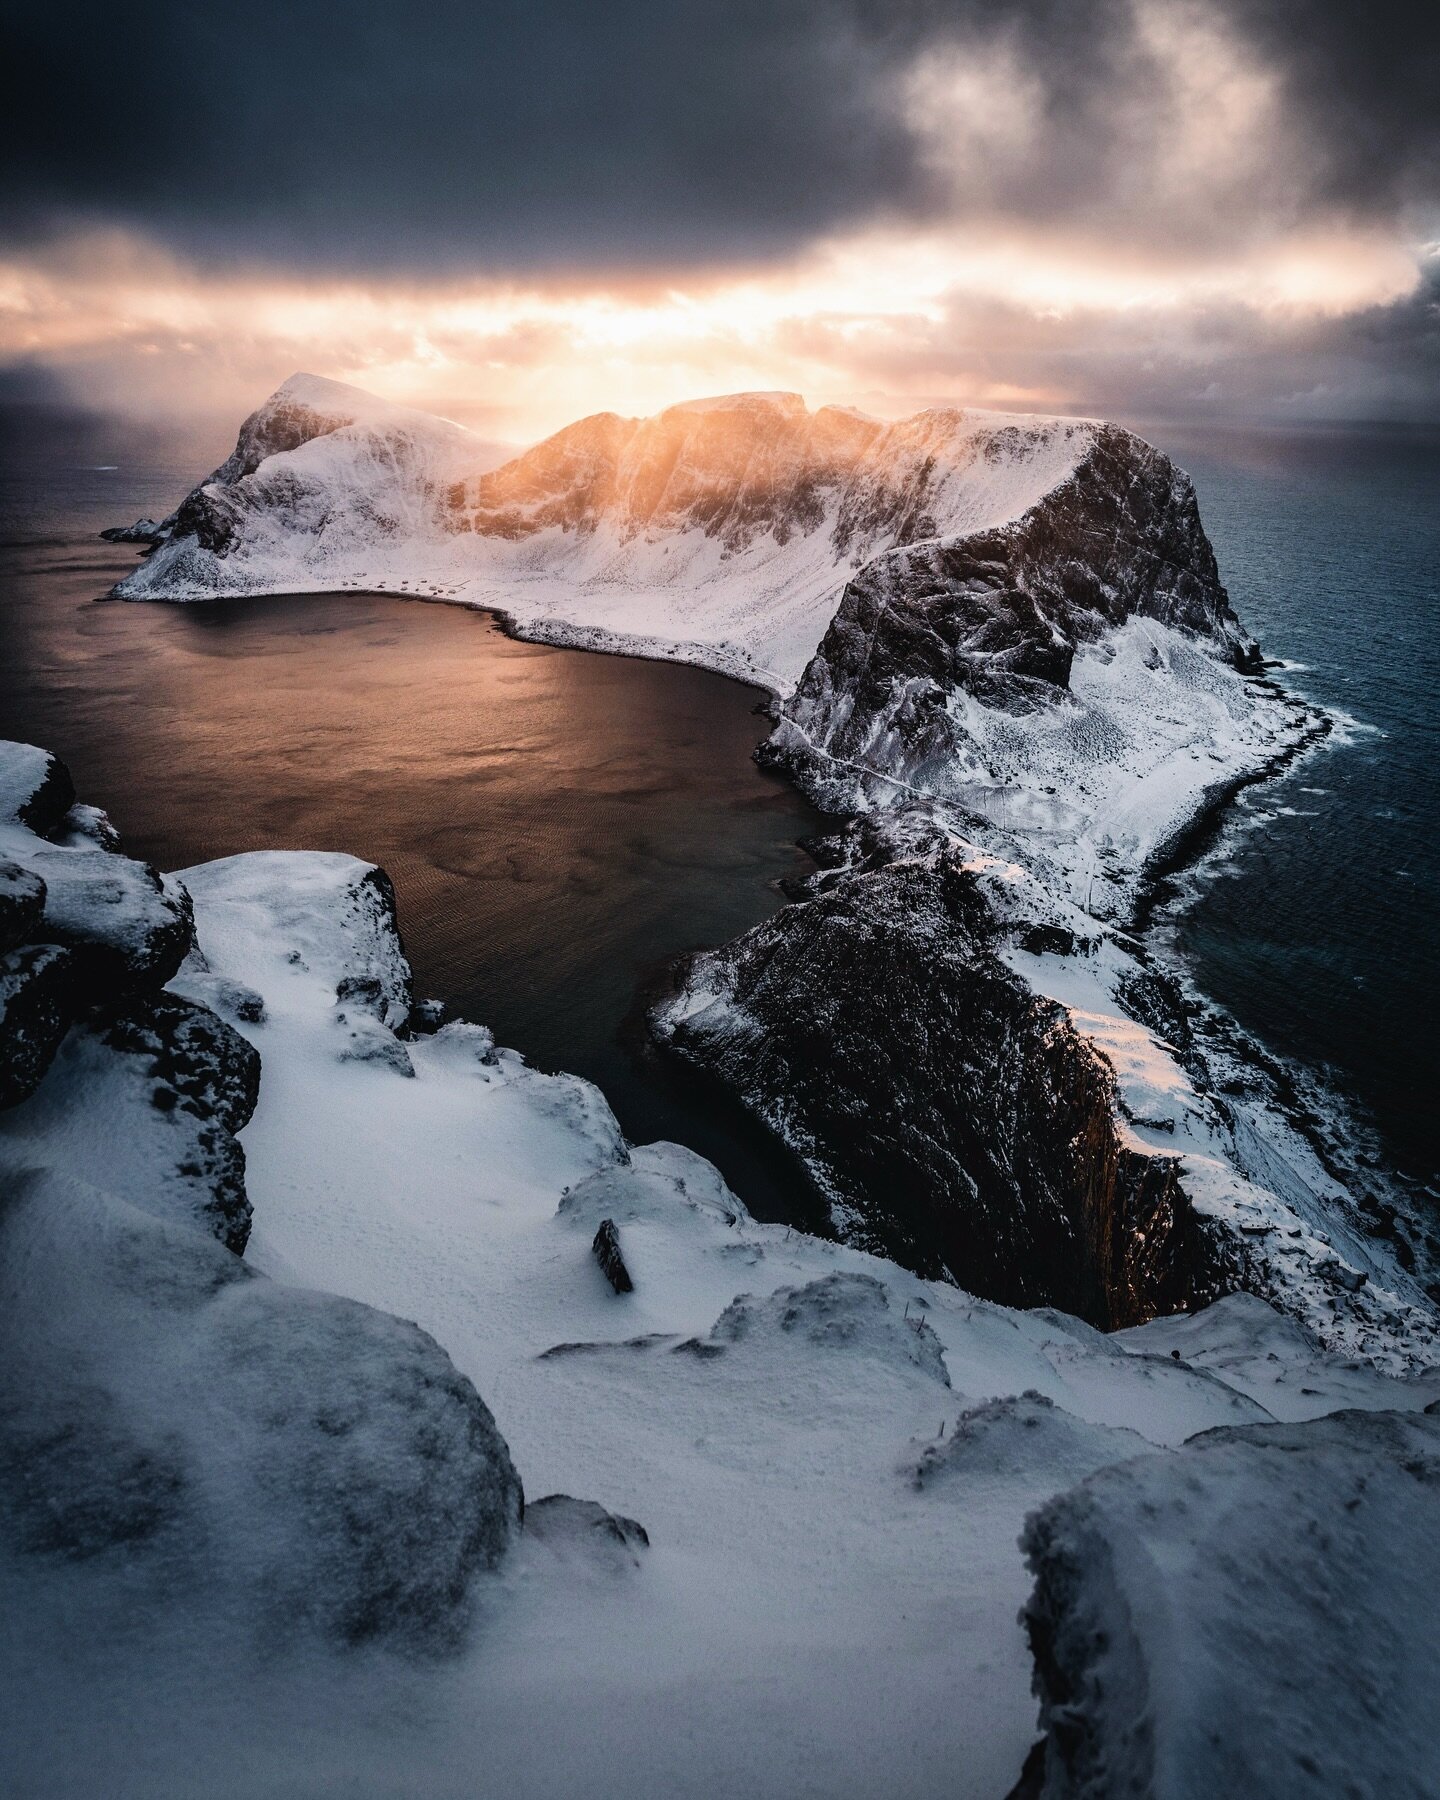 When I first saw this location I knew I wanted to photograph it someday and it was the main reason to include the tiny island of V&aelig;r&oslash;y into the Lofoten itinerary. 
The ferry to get here is not exactly frequent and the weather conditions 